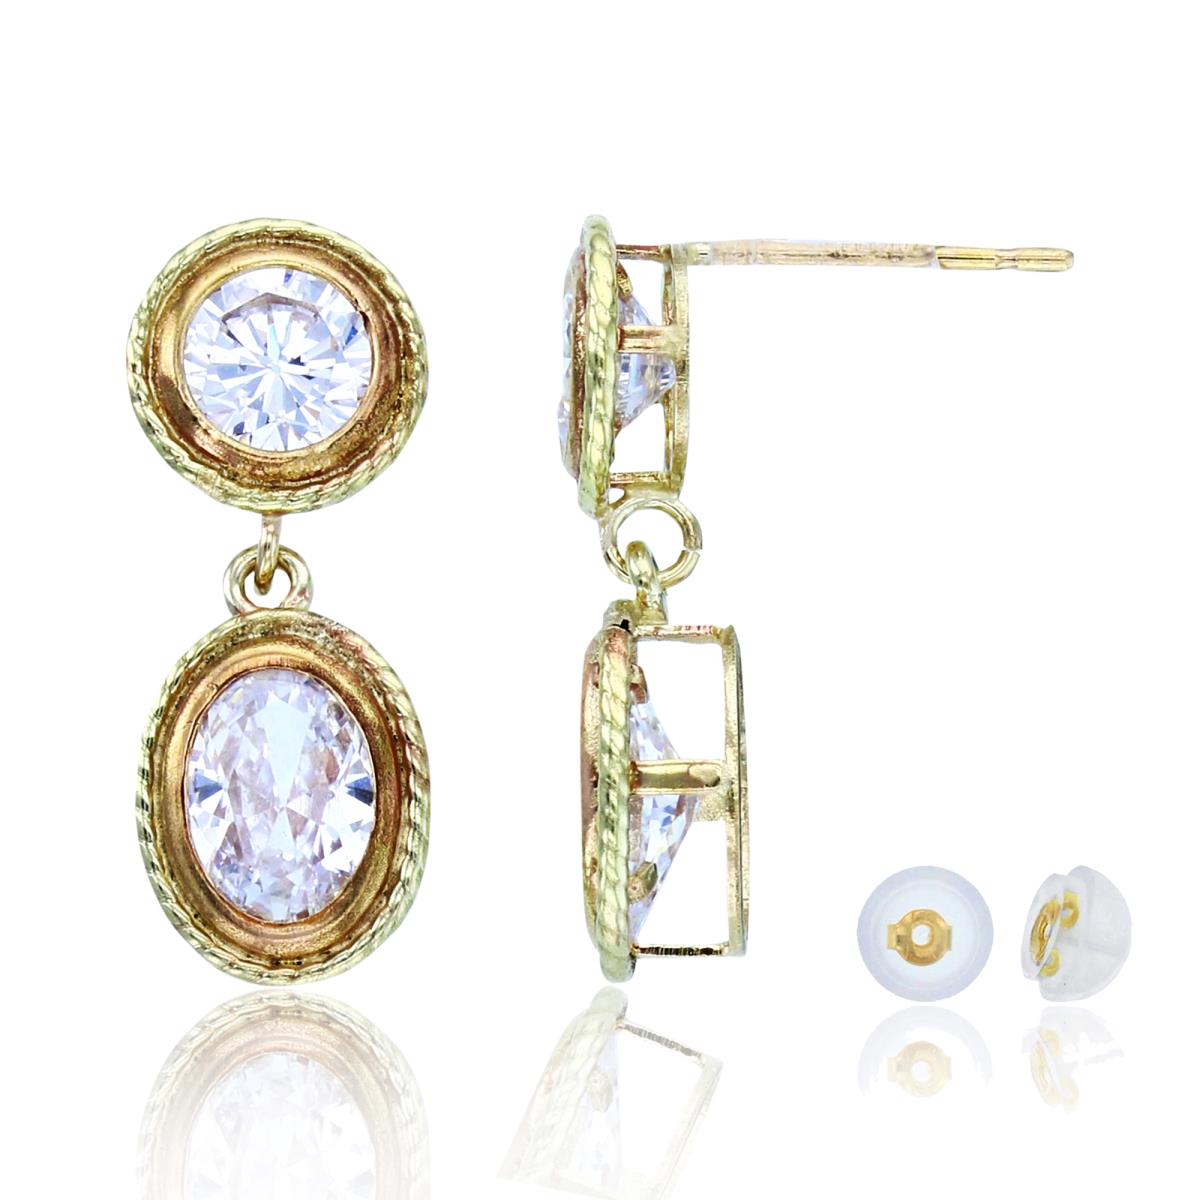 10K Yellow Gold 7x5mm Ov & 5mm Rnd CZ Bezel Textured Dangling Earrings with Silicon Backs